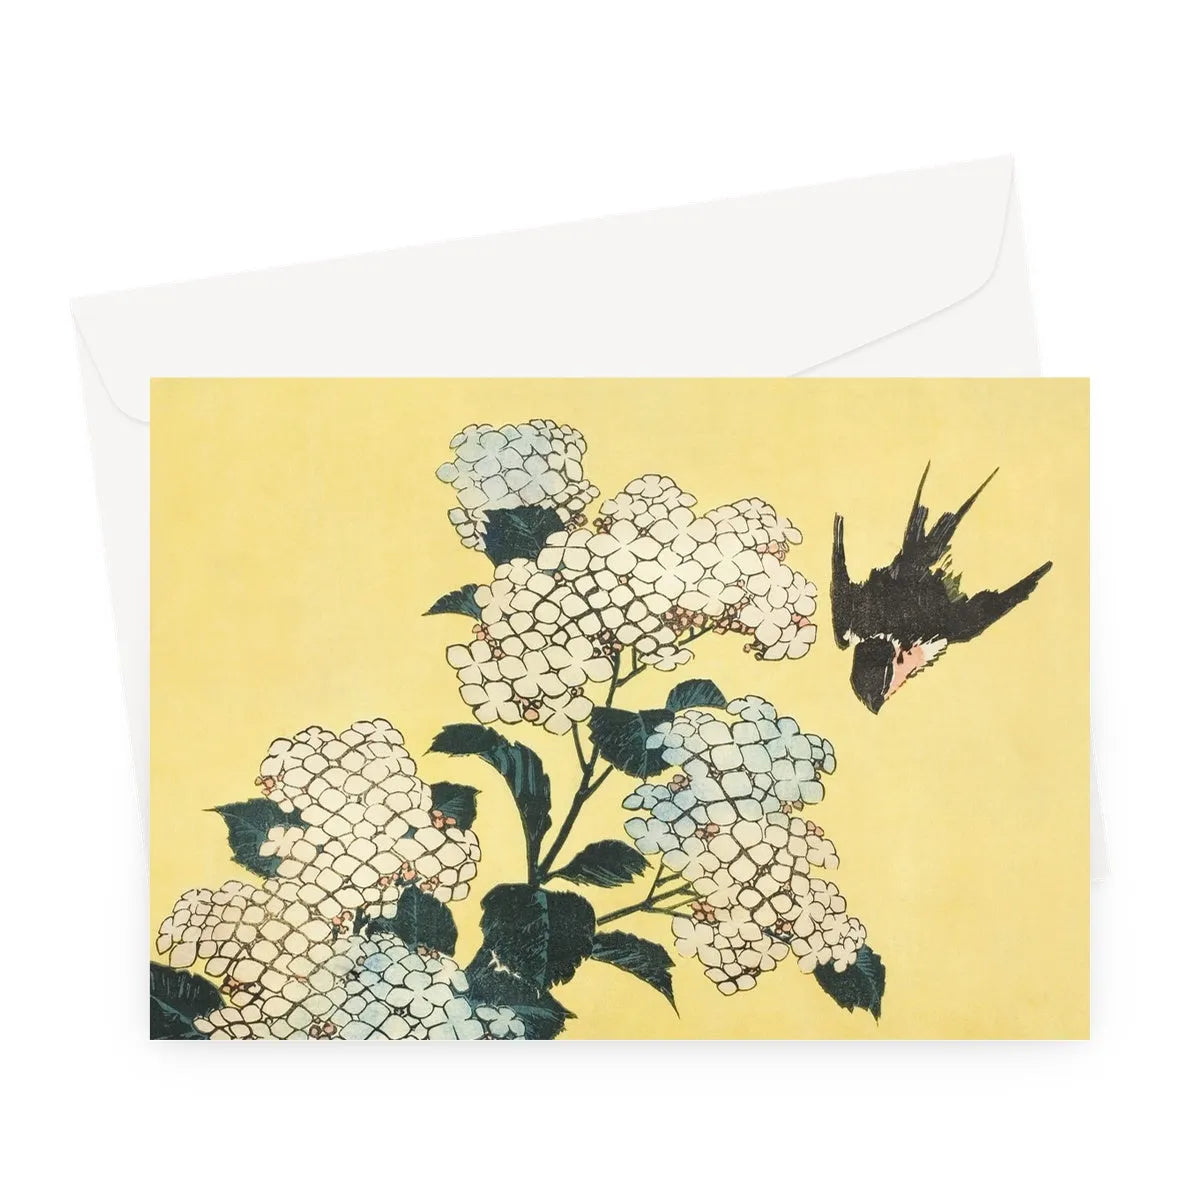 Hydrangea And Swallow By Hokusai Greeting Card - A5 Landscape / 1 Card - Greeting & Note Cards - Aesthetic Art